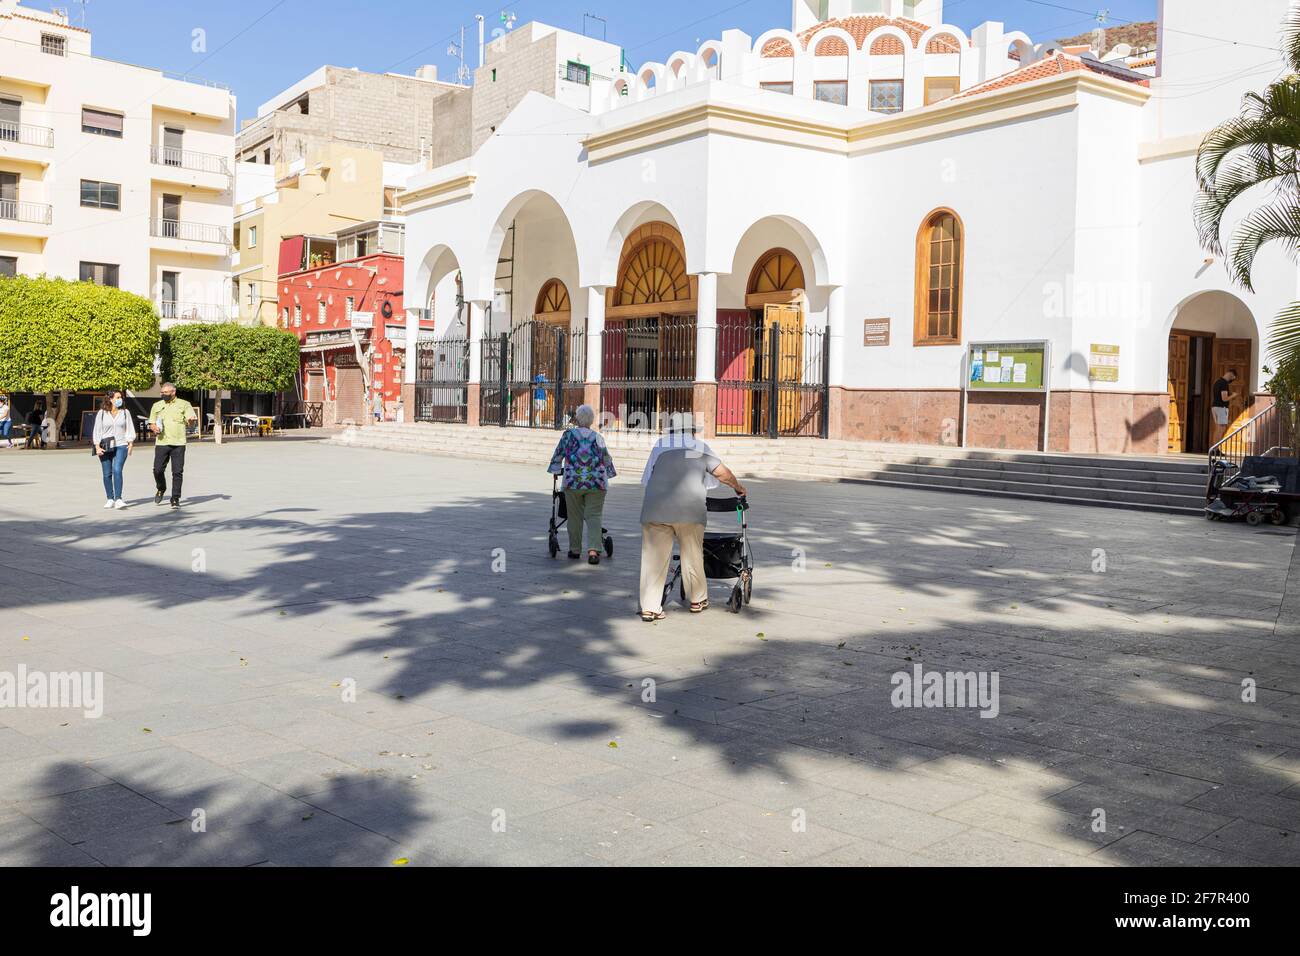 People in the church square of Nuestra Señora del Carmen in Los Cristianos, Tenerife, Canary Islands, Spain Stock Photo